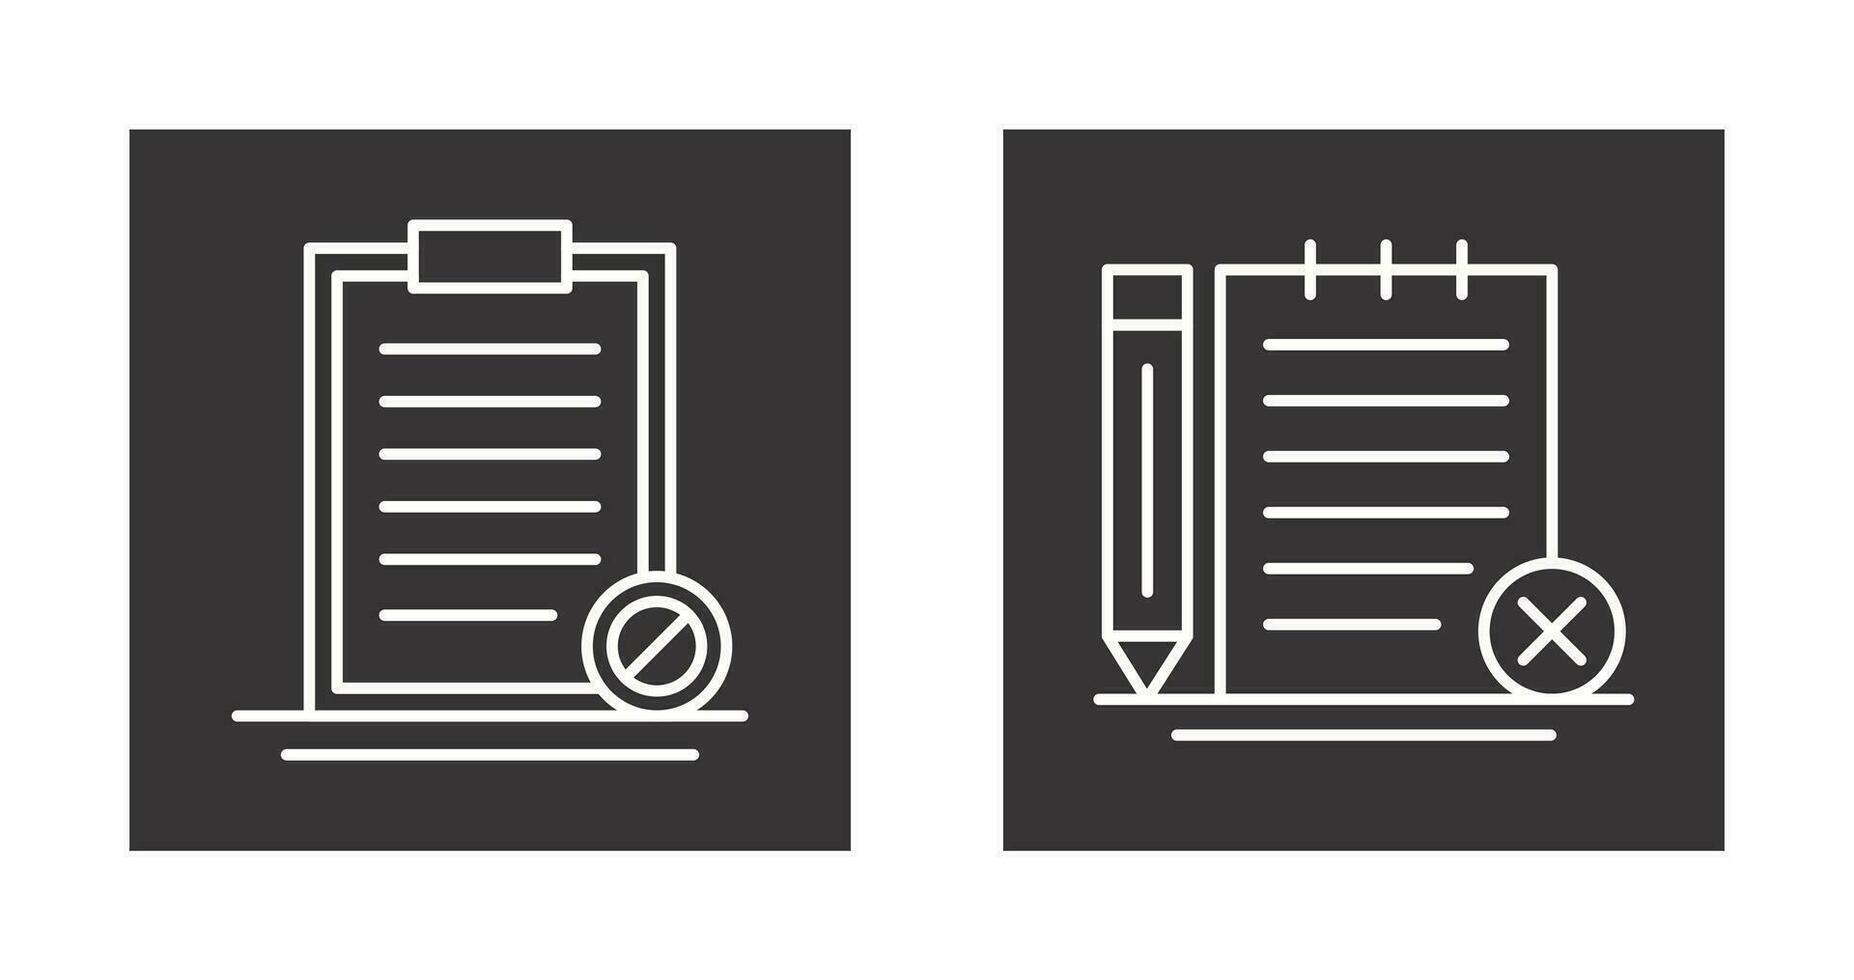 Prohibition and Unchecked Notes Icon vector